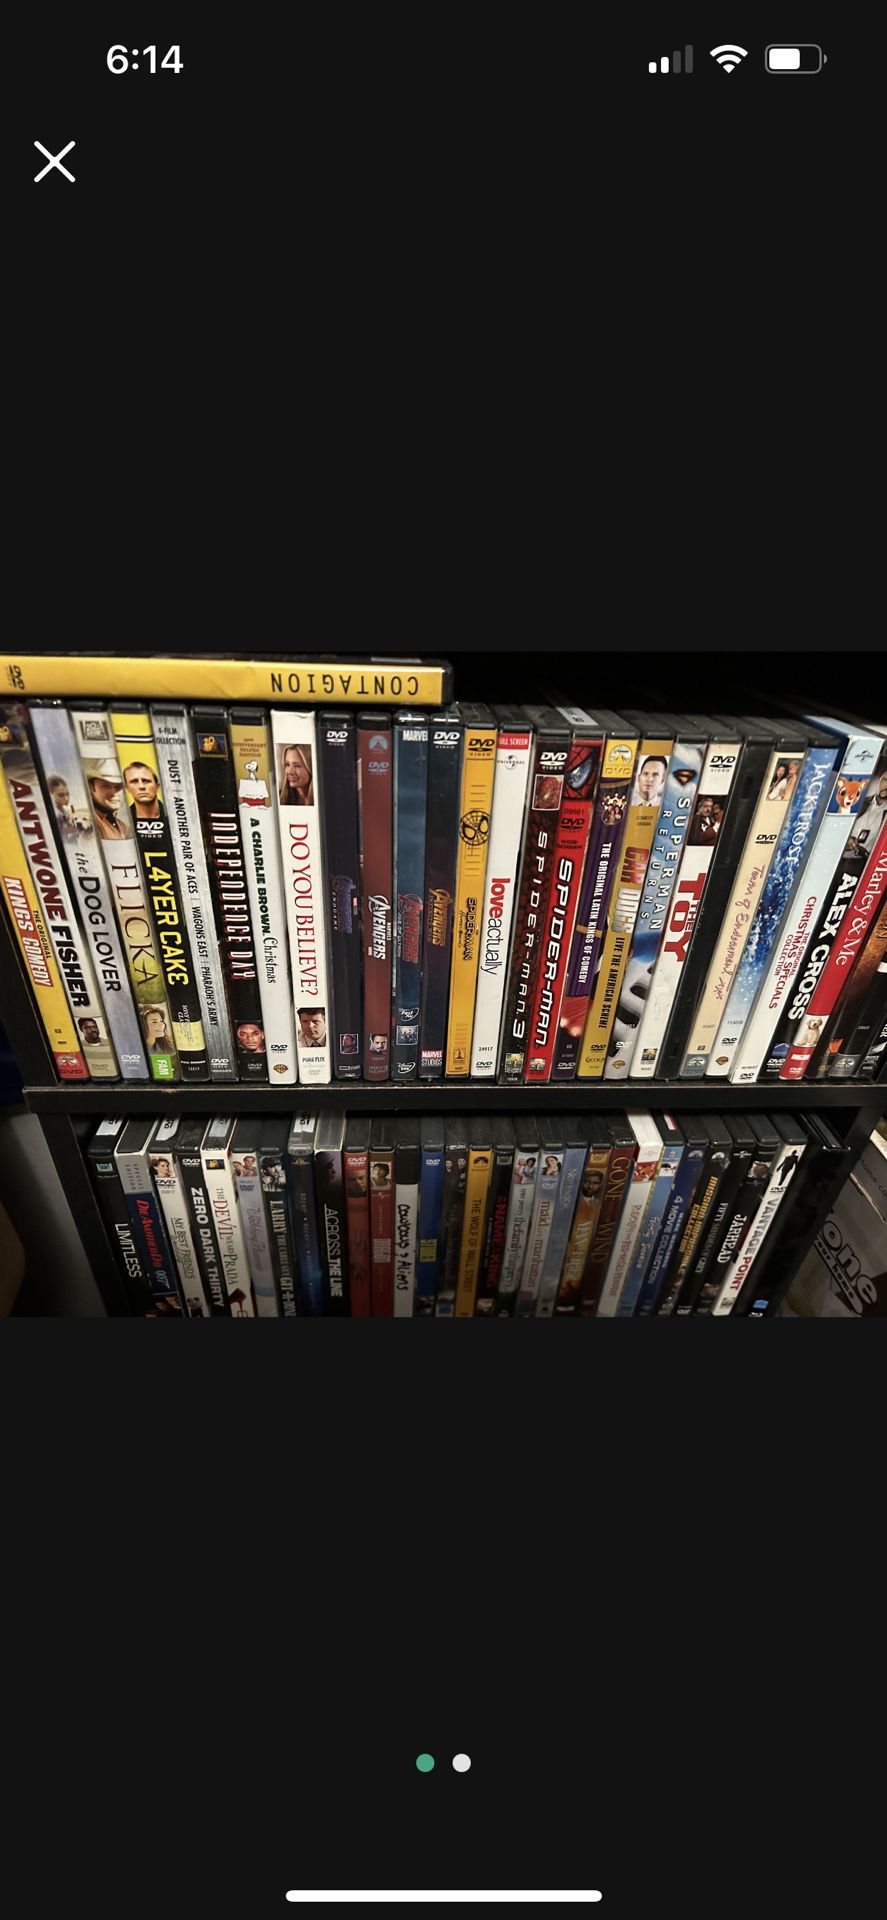 Over 100 Movies DVD And Some Blu-ray  Most Like New Asking 75 Cents  Must By More The 20 To Meet Some Have Been Sold Need Gone 